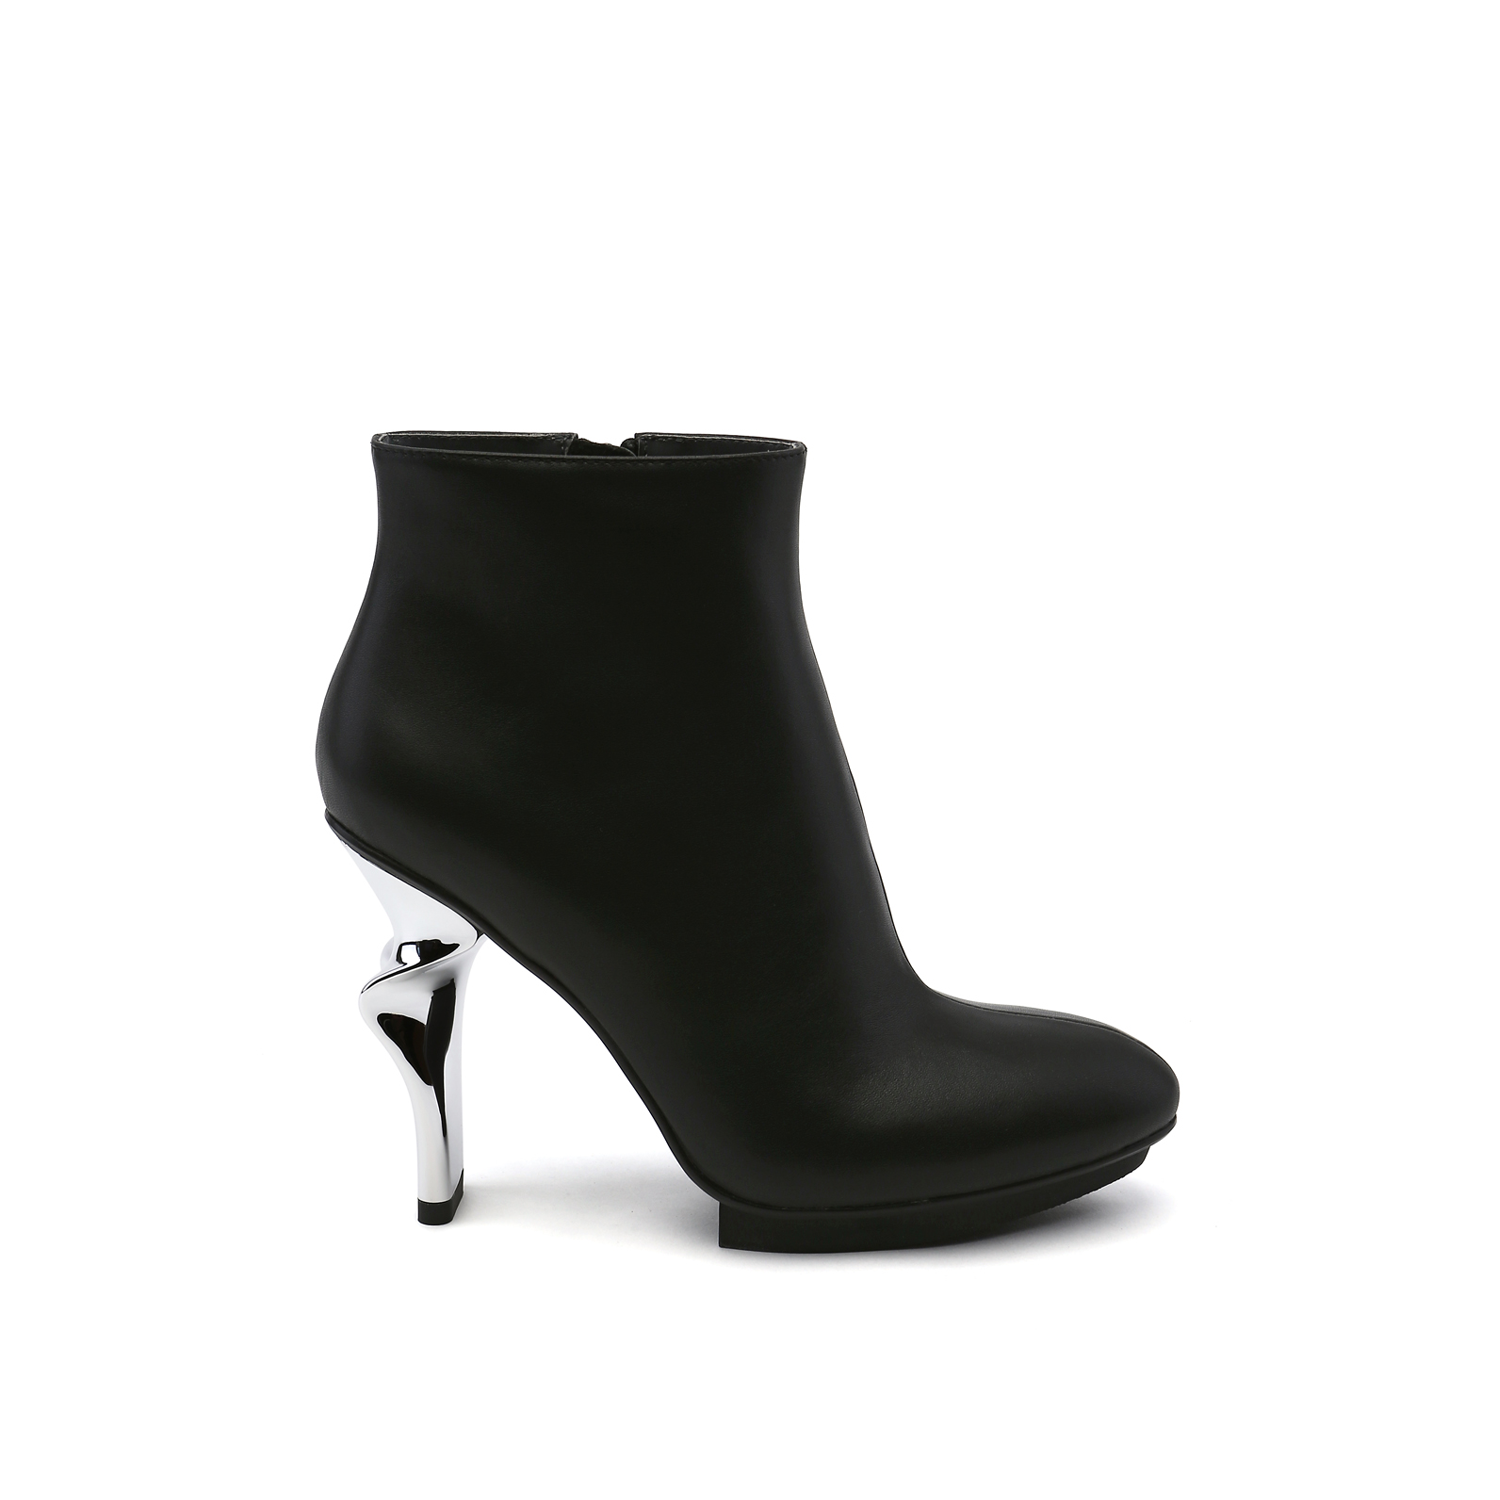 outer side view of the united nude twirl bootie. This bootie is black with a metallic spiraling high heel.